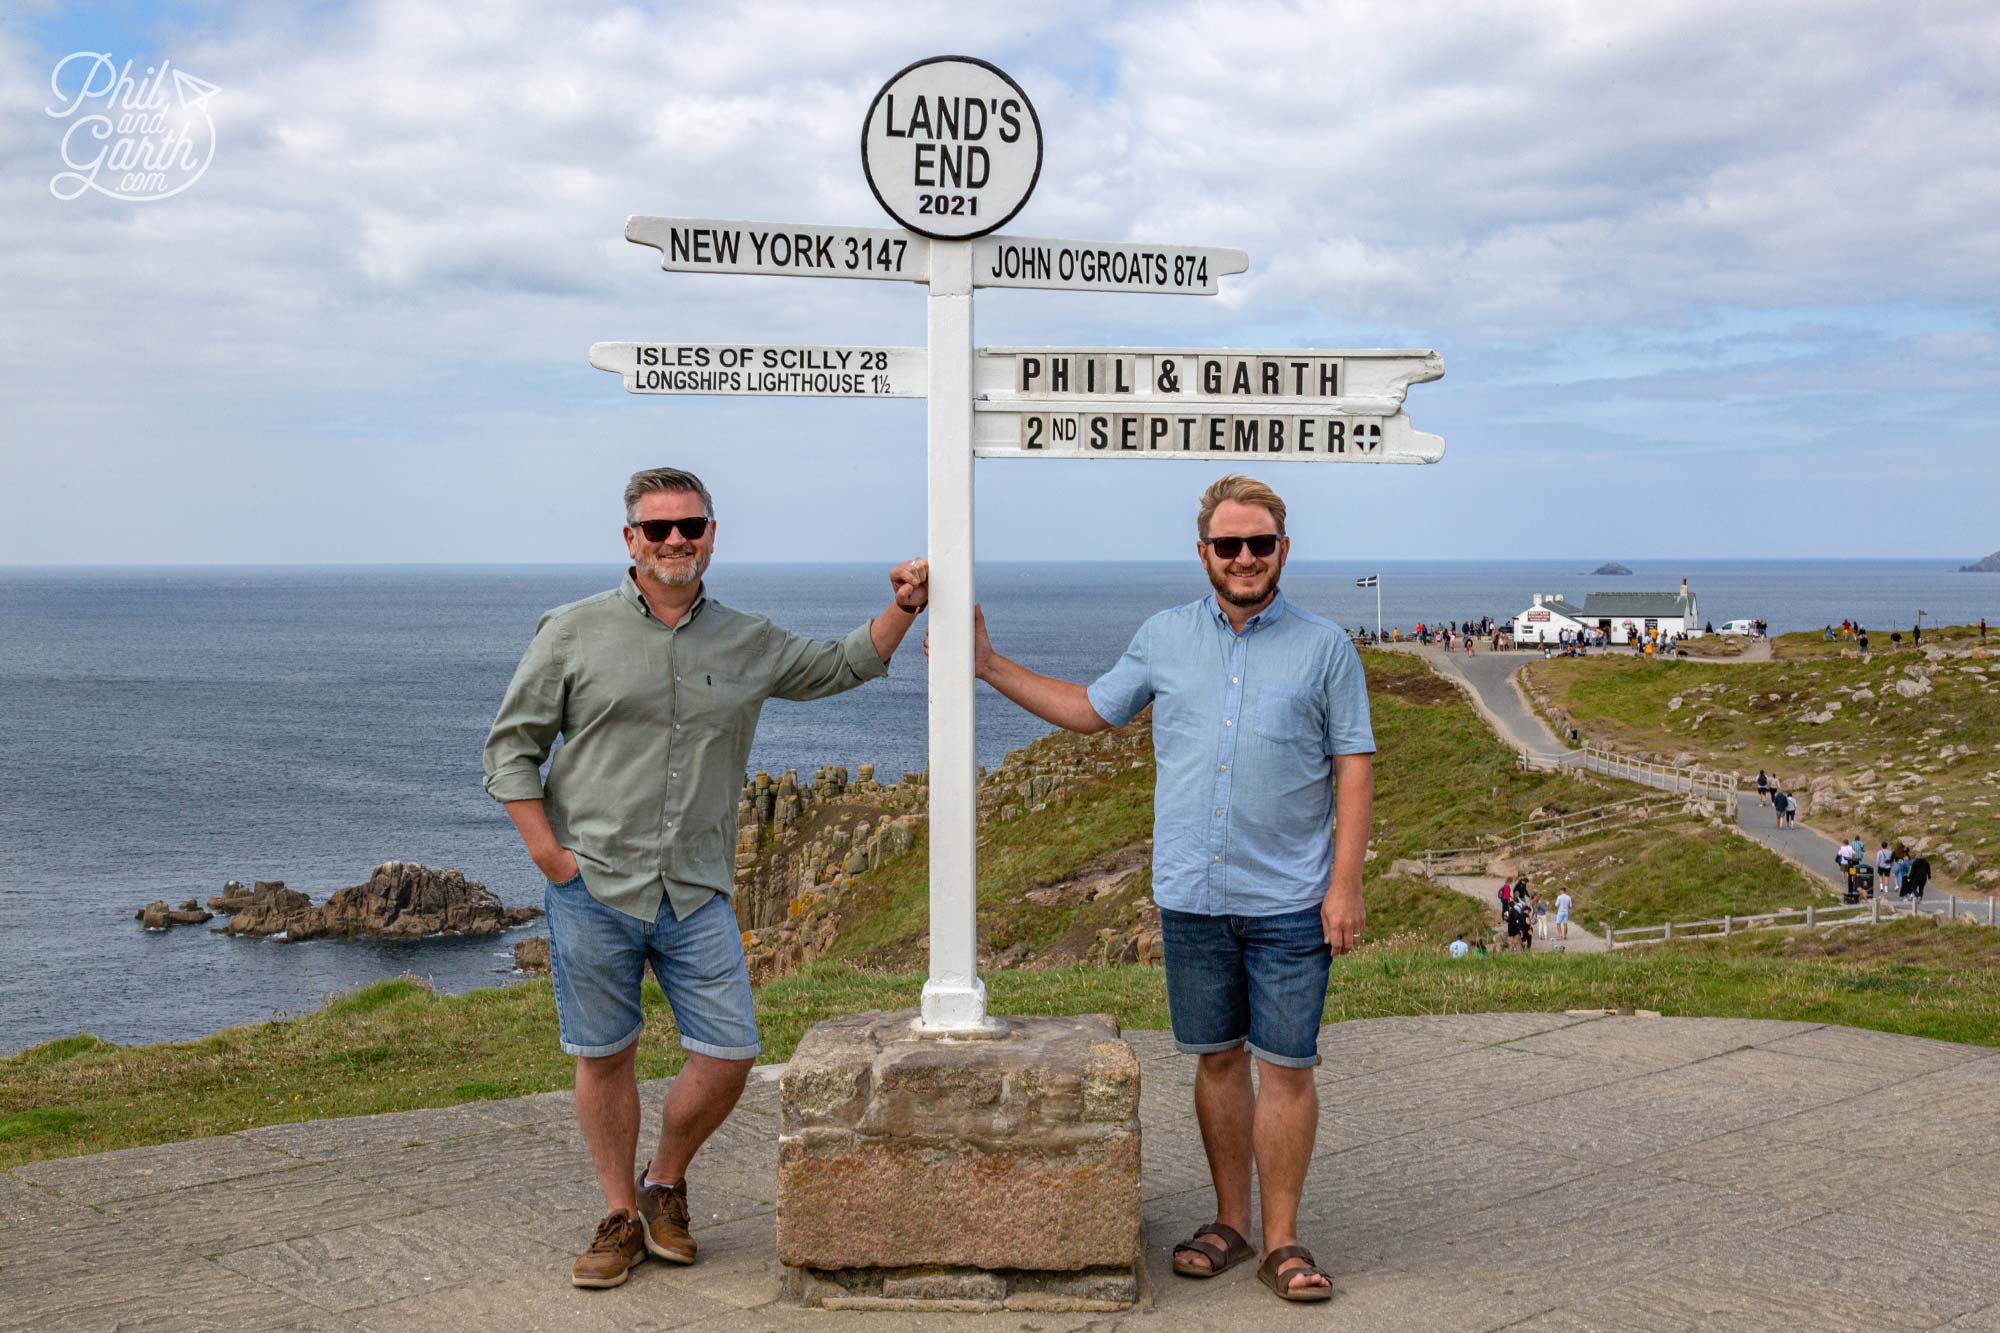 Phil and Garth stood next to the famous Land's End sign in Cornwall England